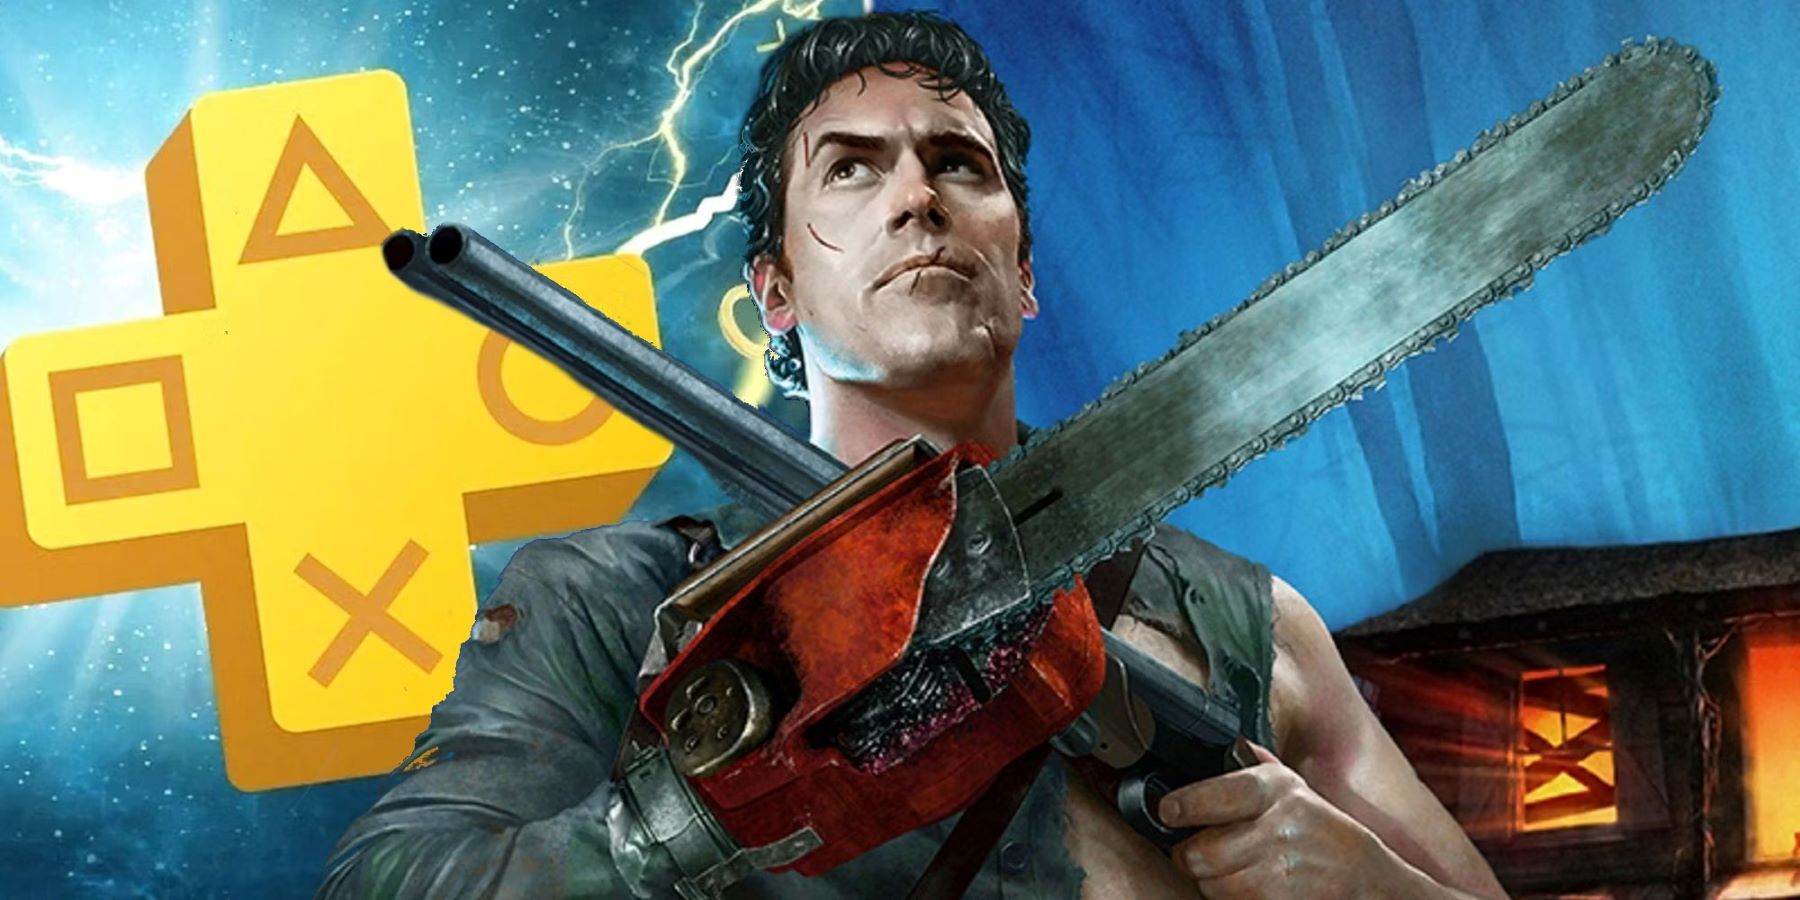 Ash from Evil Dead with PS Plus logo